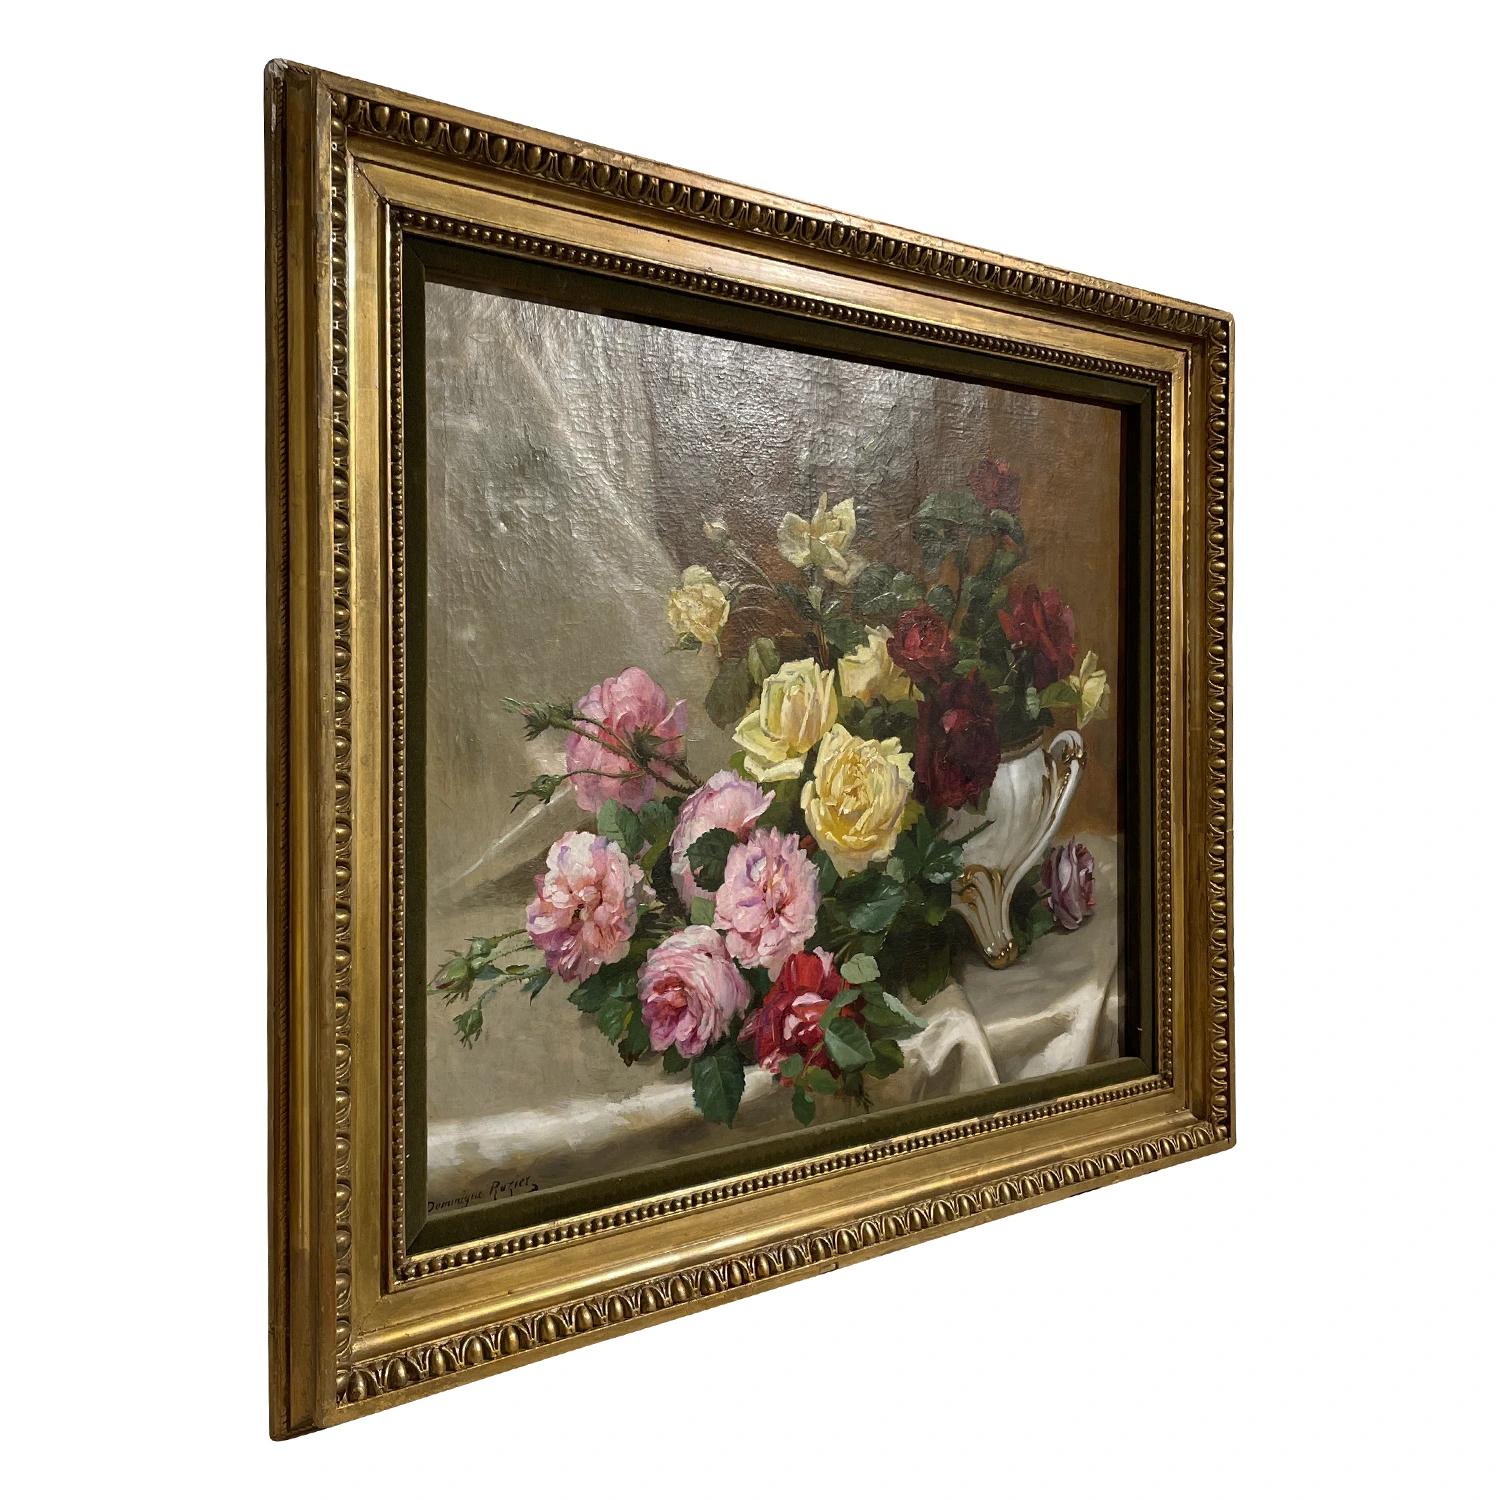 A pink-yellow, antique French still life oil on canvas painting, depicting a white ceramic vase with many roses, painted by Dominique Hubert Rozier in a handcrafted, original gilded wood frame, in good condition. The colorful Parisian painting is